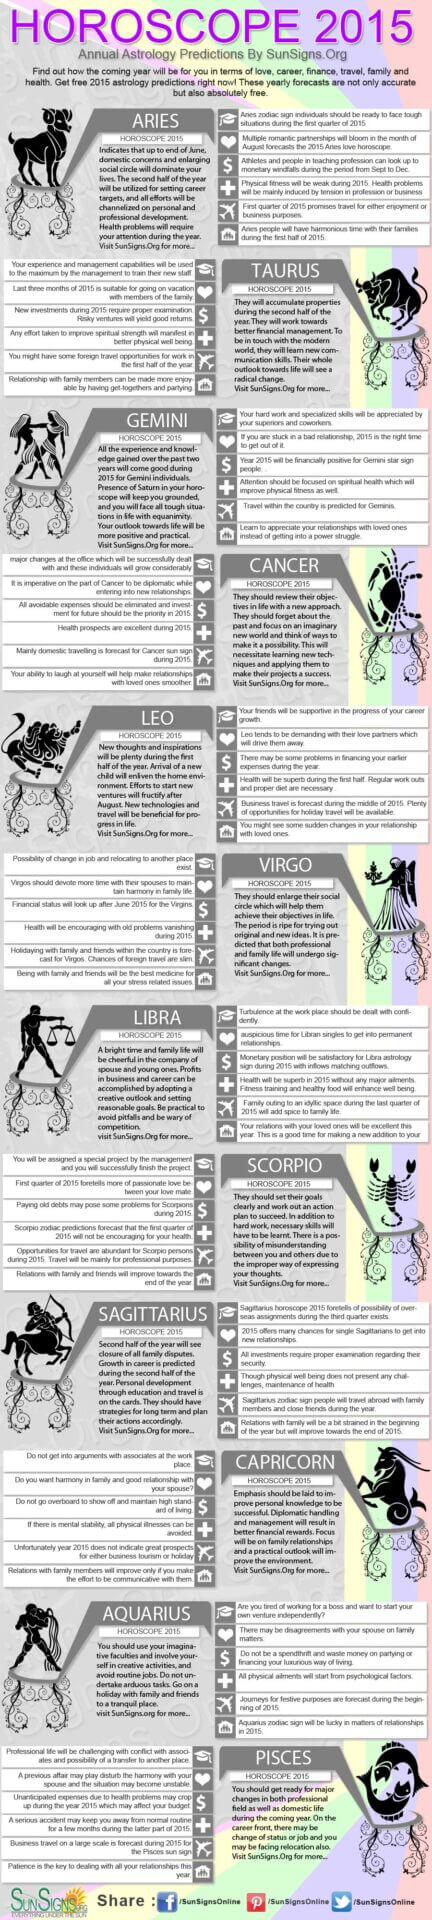 horoscope 2015 infographics: Yearly 2015 Horoscopes For The 12 Zodiac Signs The horoscope 2015 for each of the 12 zodiac signs are just a click away! Find out how the coming year will be for you in terms of love, career, finance, travel, family and health. Get free 2015 astrology predictions right now! These yearly forecasts are not only accurate but also absolutely free.